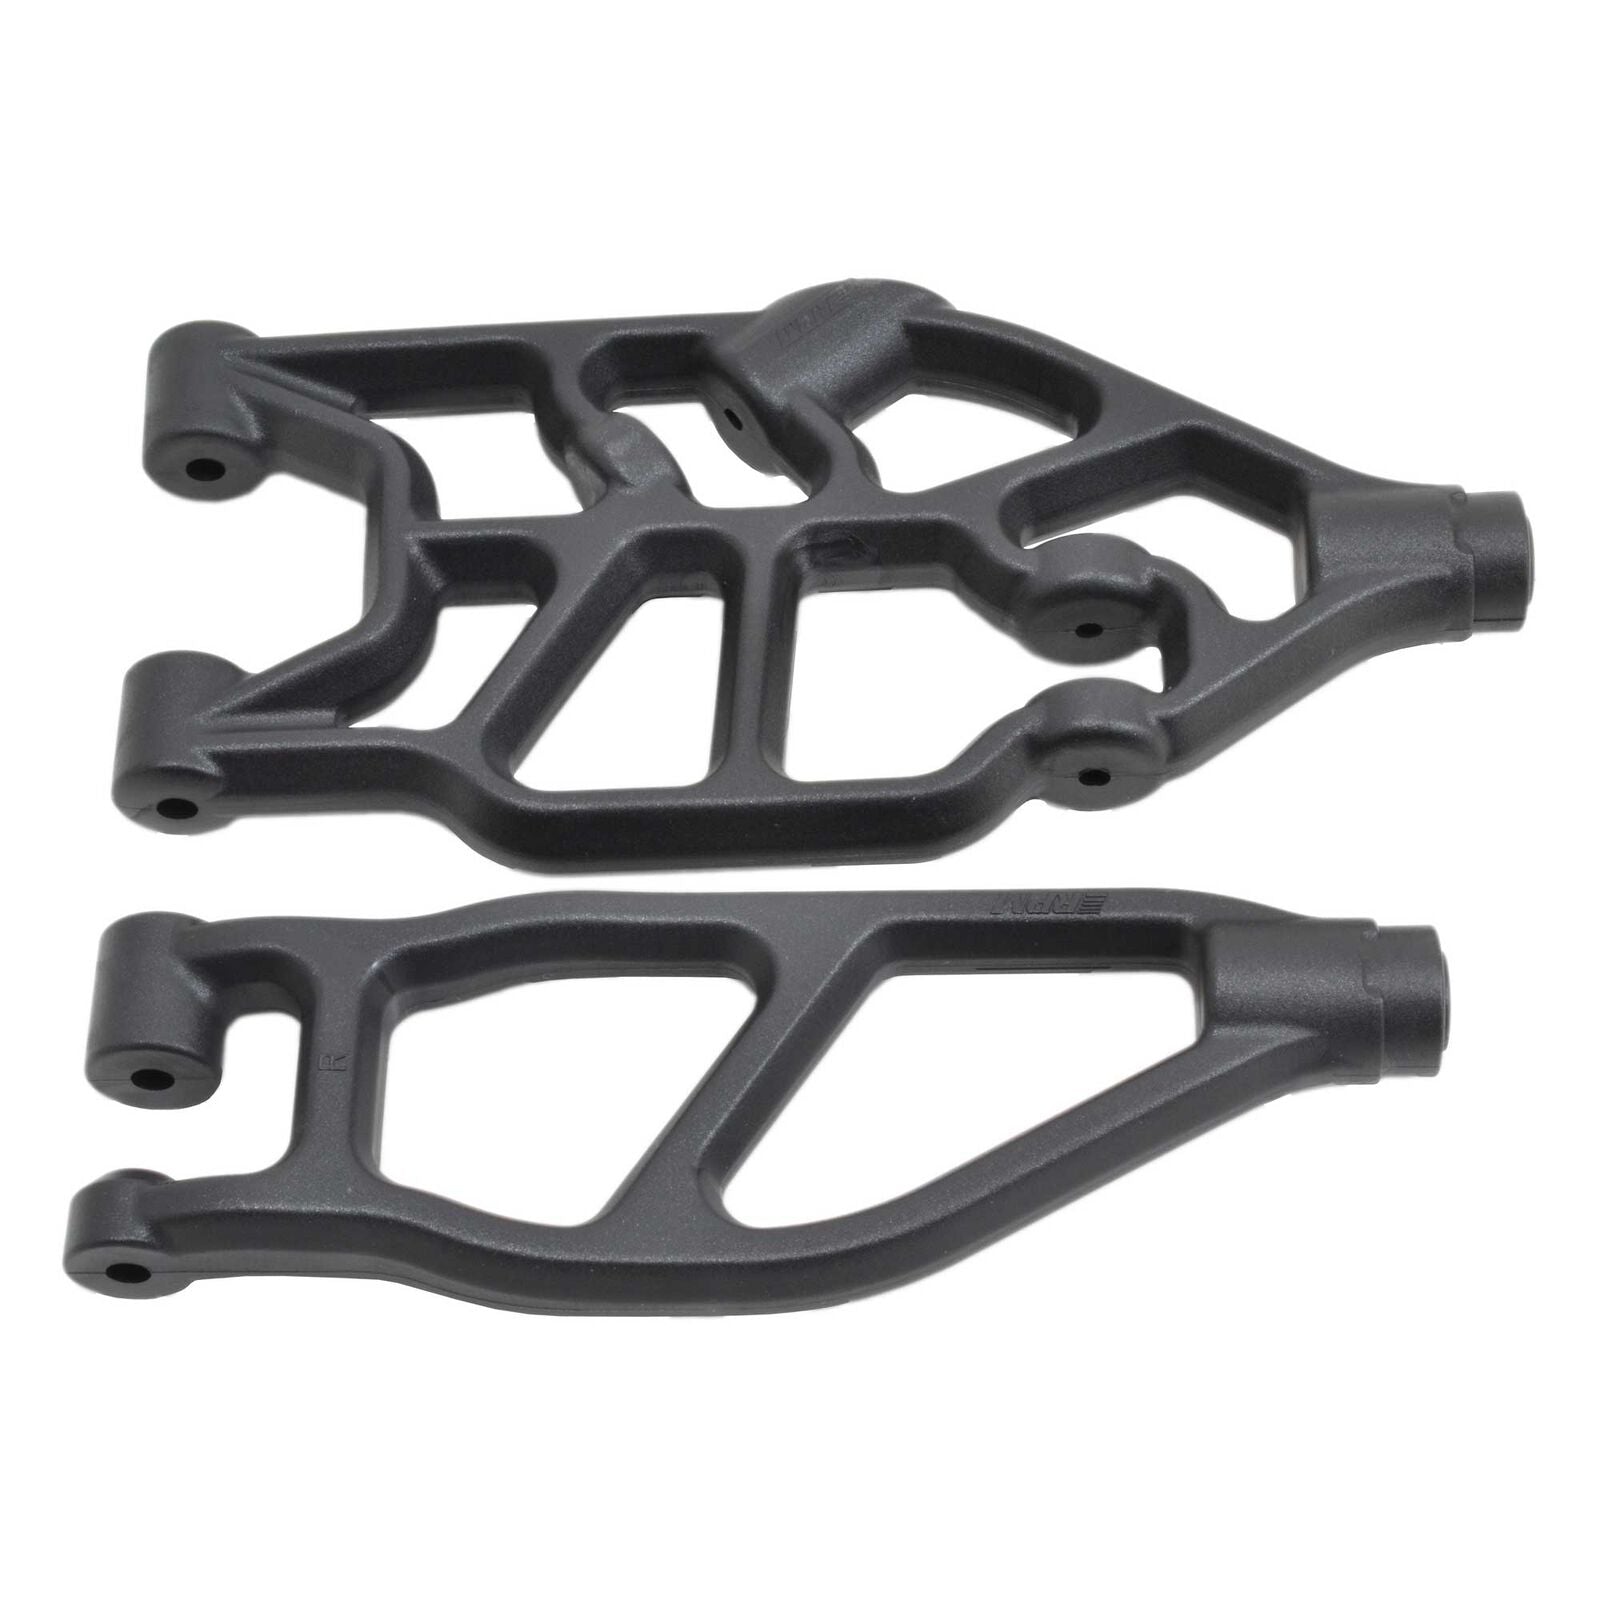 RPM 81562 Front Right Upper & Lower A-arms for the ARRMA Kraton 8S & Outcast 8S